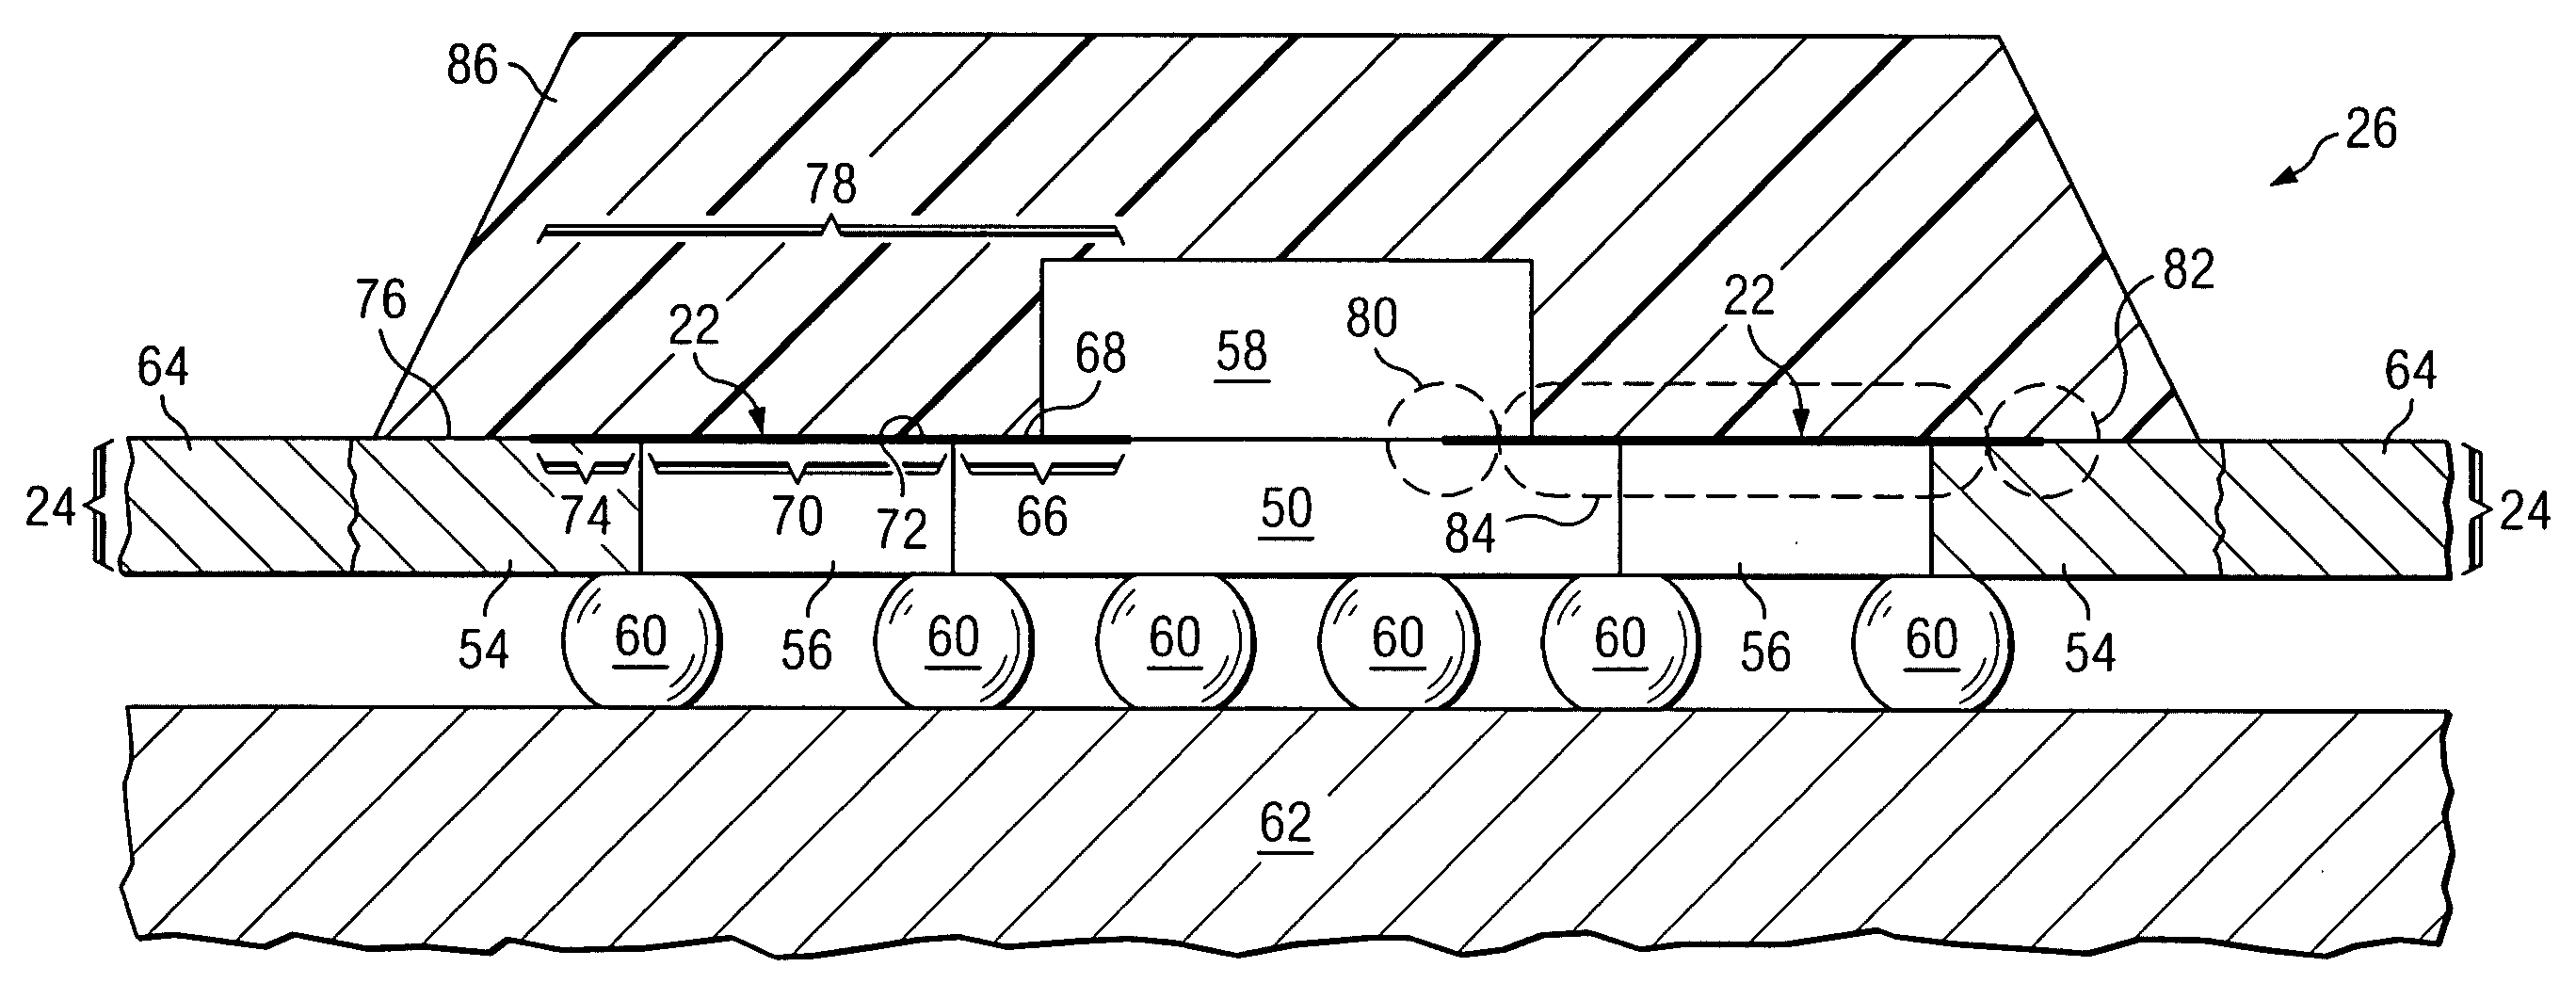 Printing one or more electrically conductive bonding lines to provide electrical conductivity in a circuit